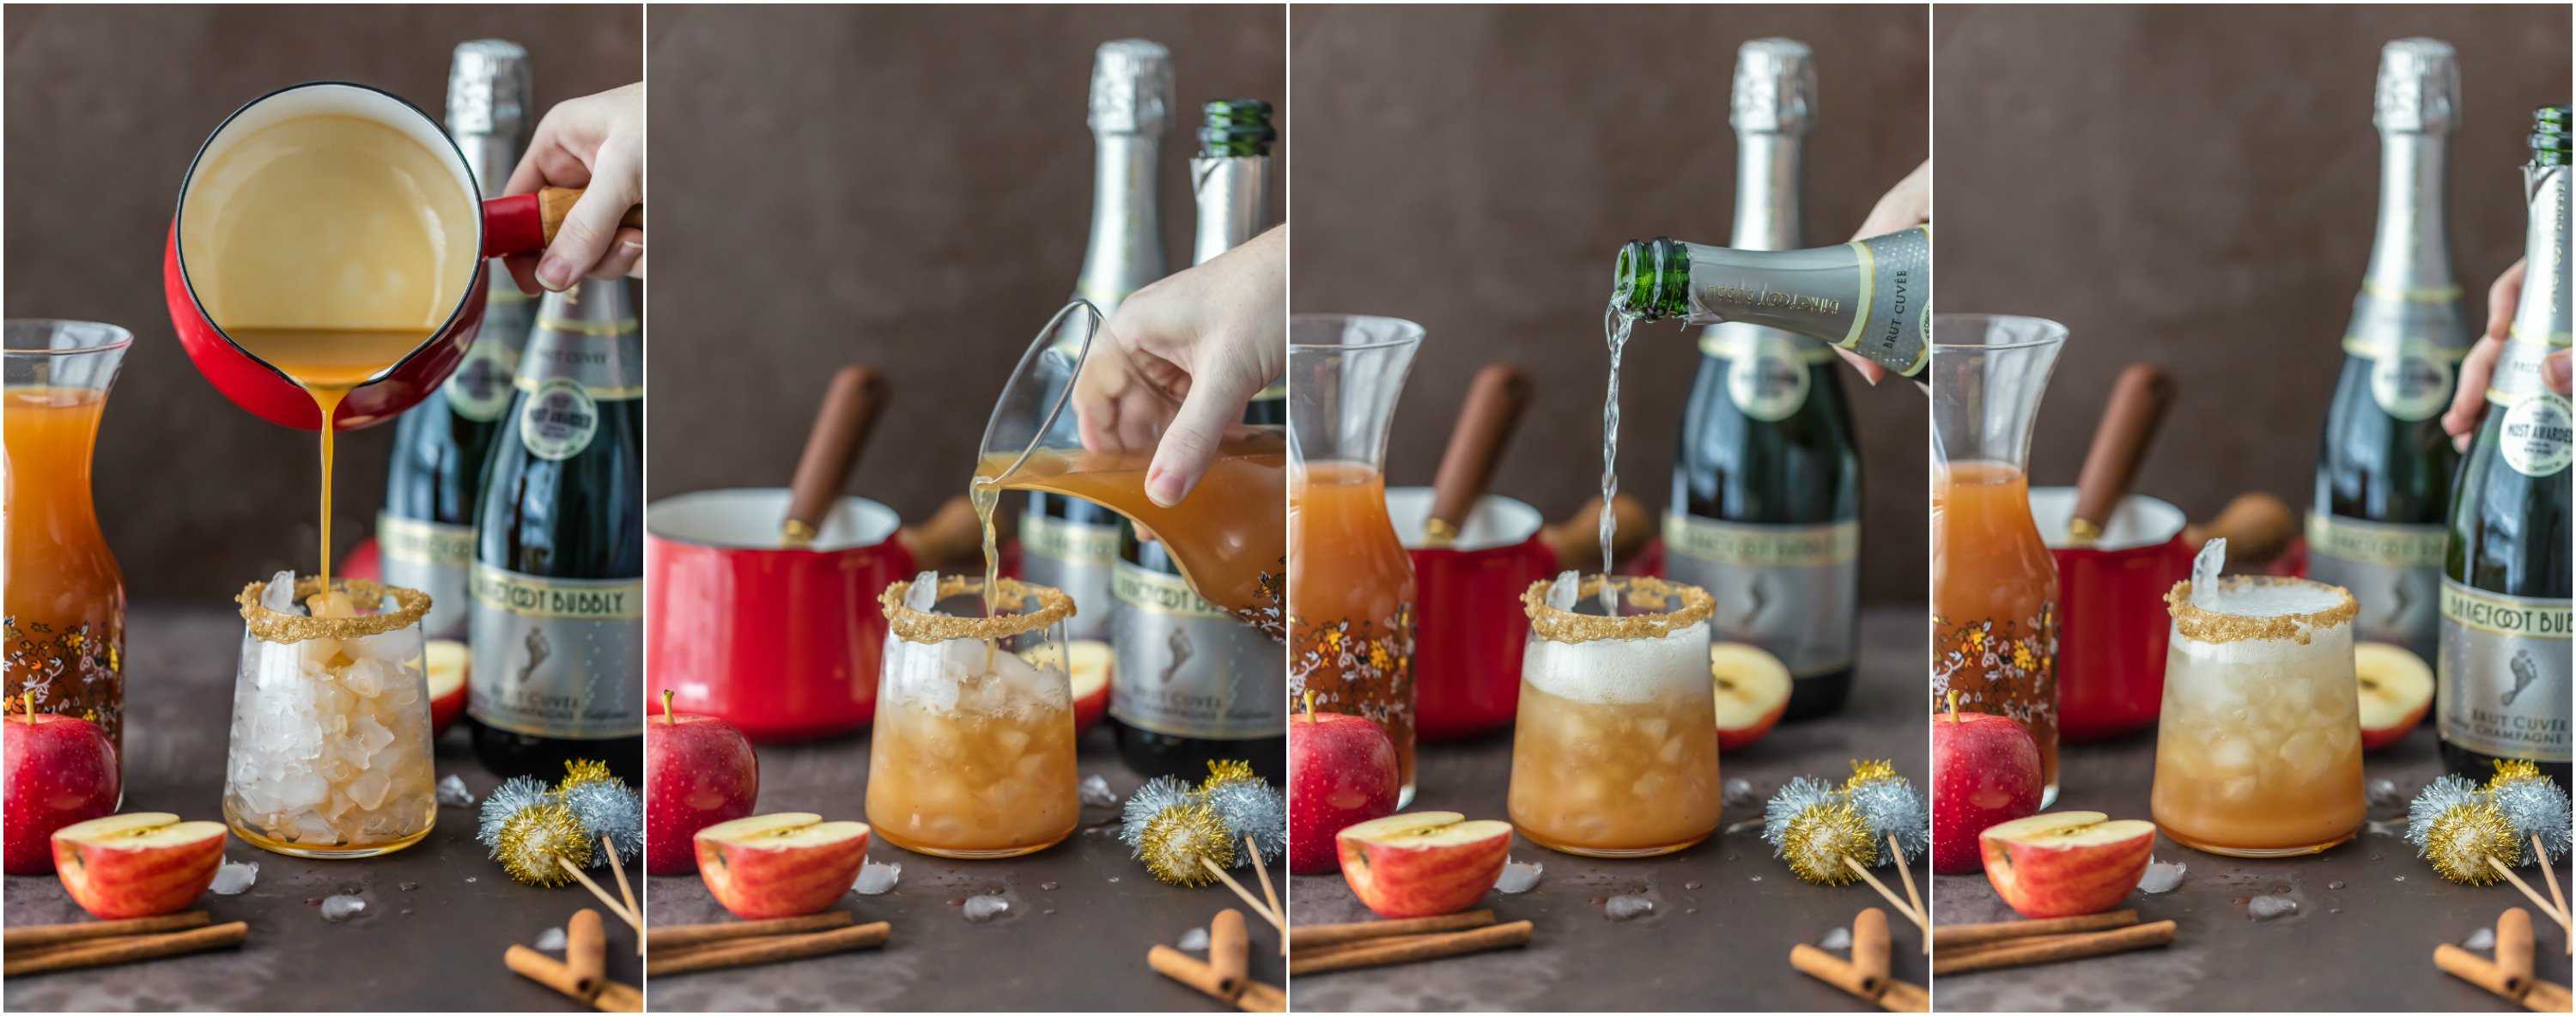 SPARKLING APPLE PIE ON THE ROCKS is the perfect Fall cocktail! Cinnamon Apple Cider mixed with Caramel Apple Simple Syrup and topped with bubbly champagne! BEST HOLIDAY DRINK EVER!